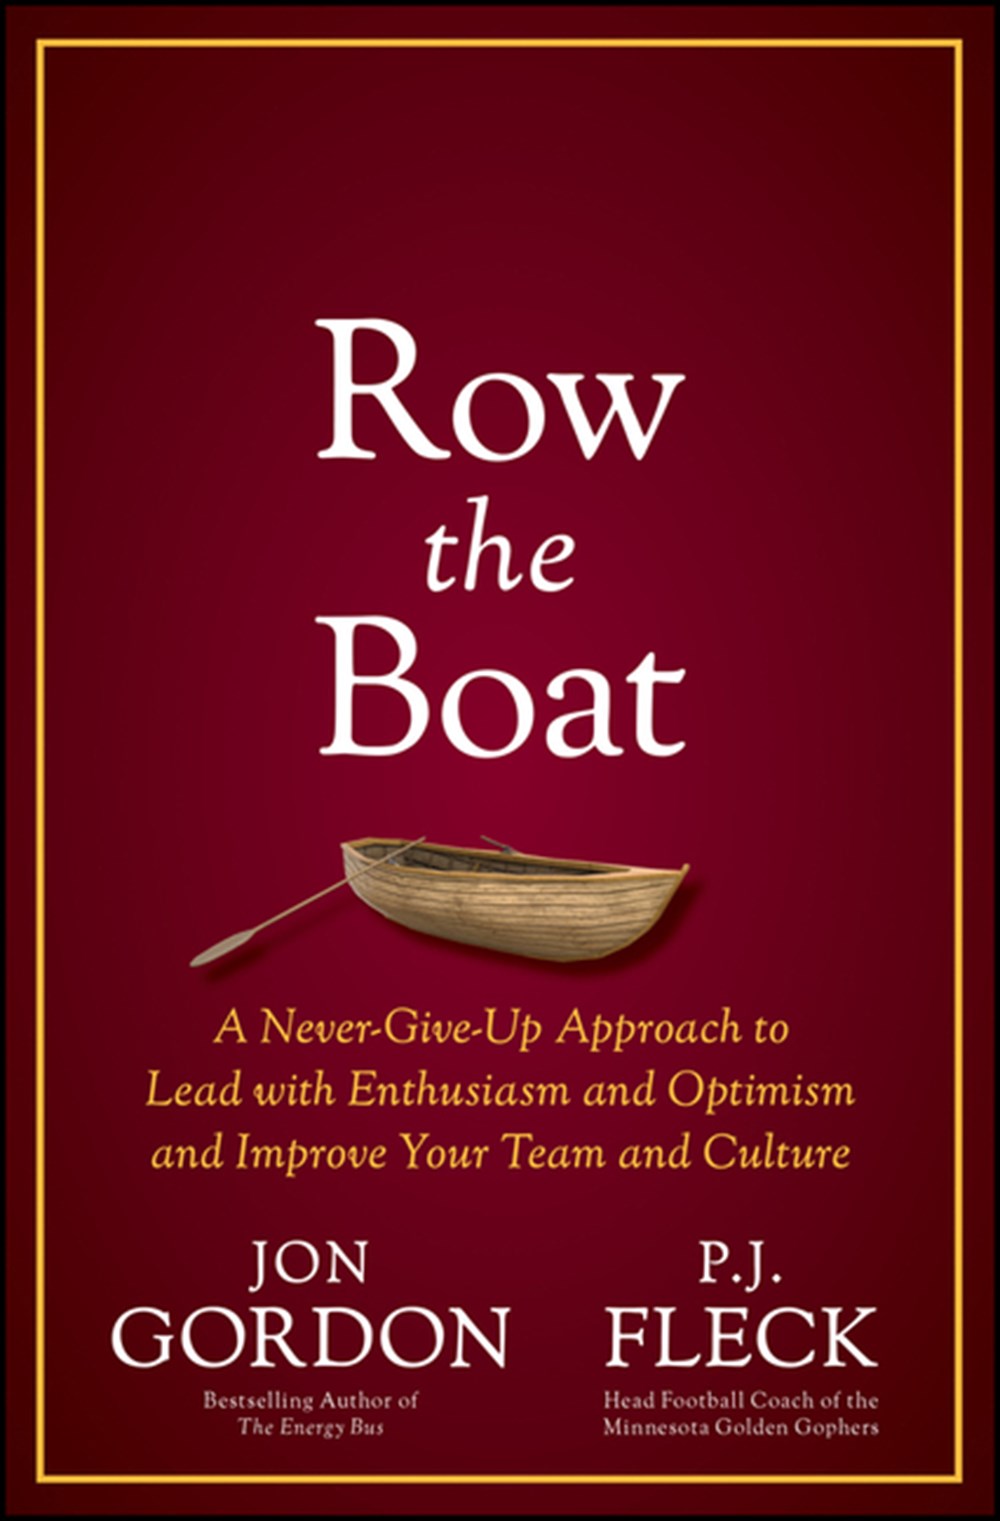 Row the Boat A Never-Give-Up Approach to Lead with Enthusiasm and Optimism and Improve Your Team and